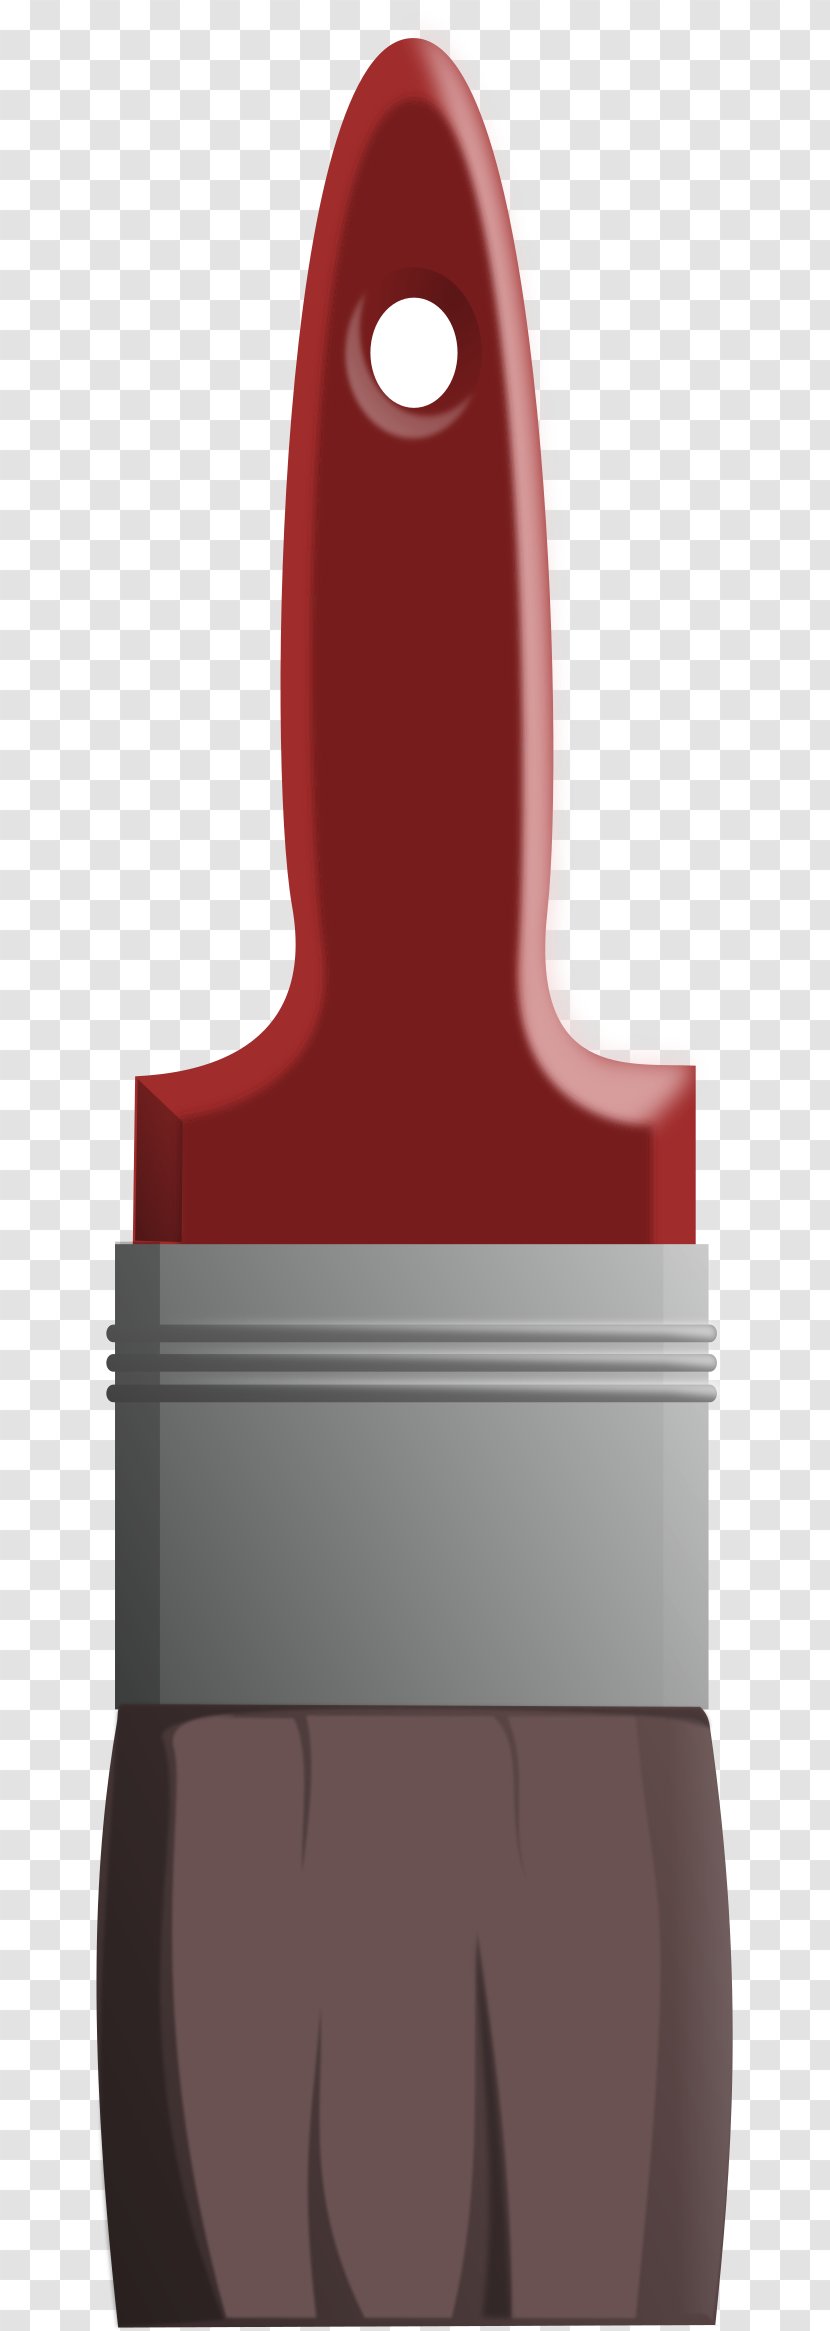 Paint Brush Cartoon - Red Watercolor Painting Transparent PNG